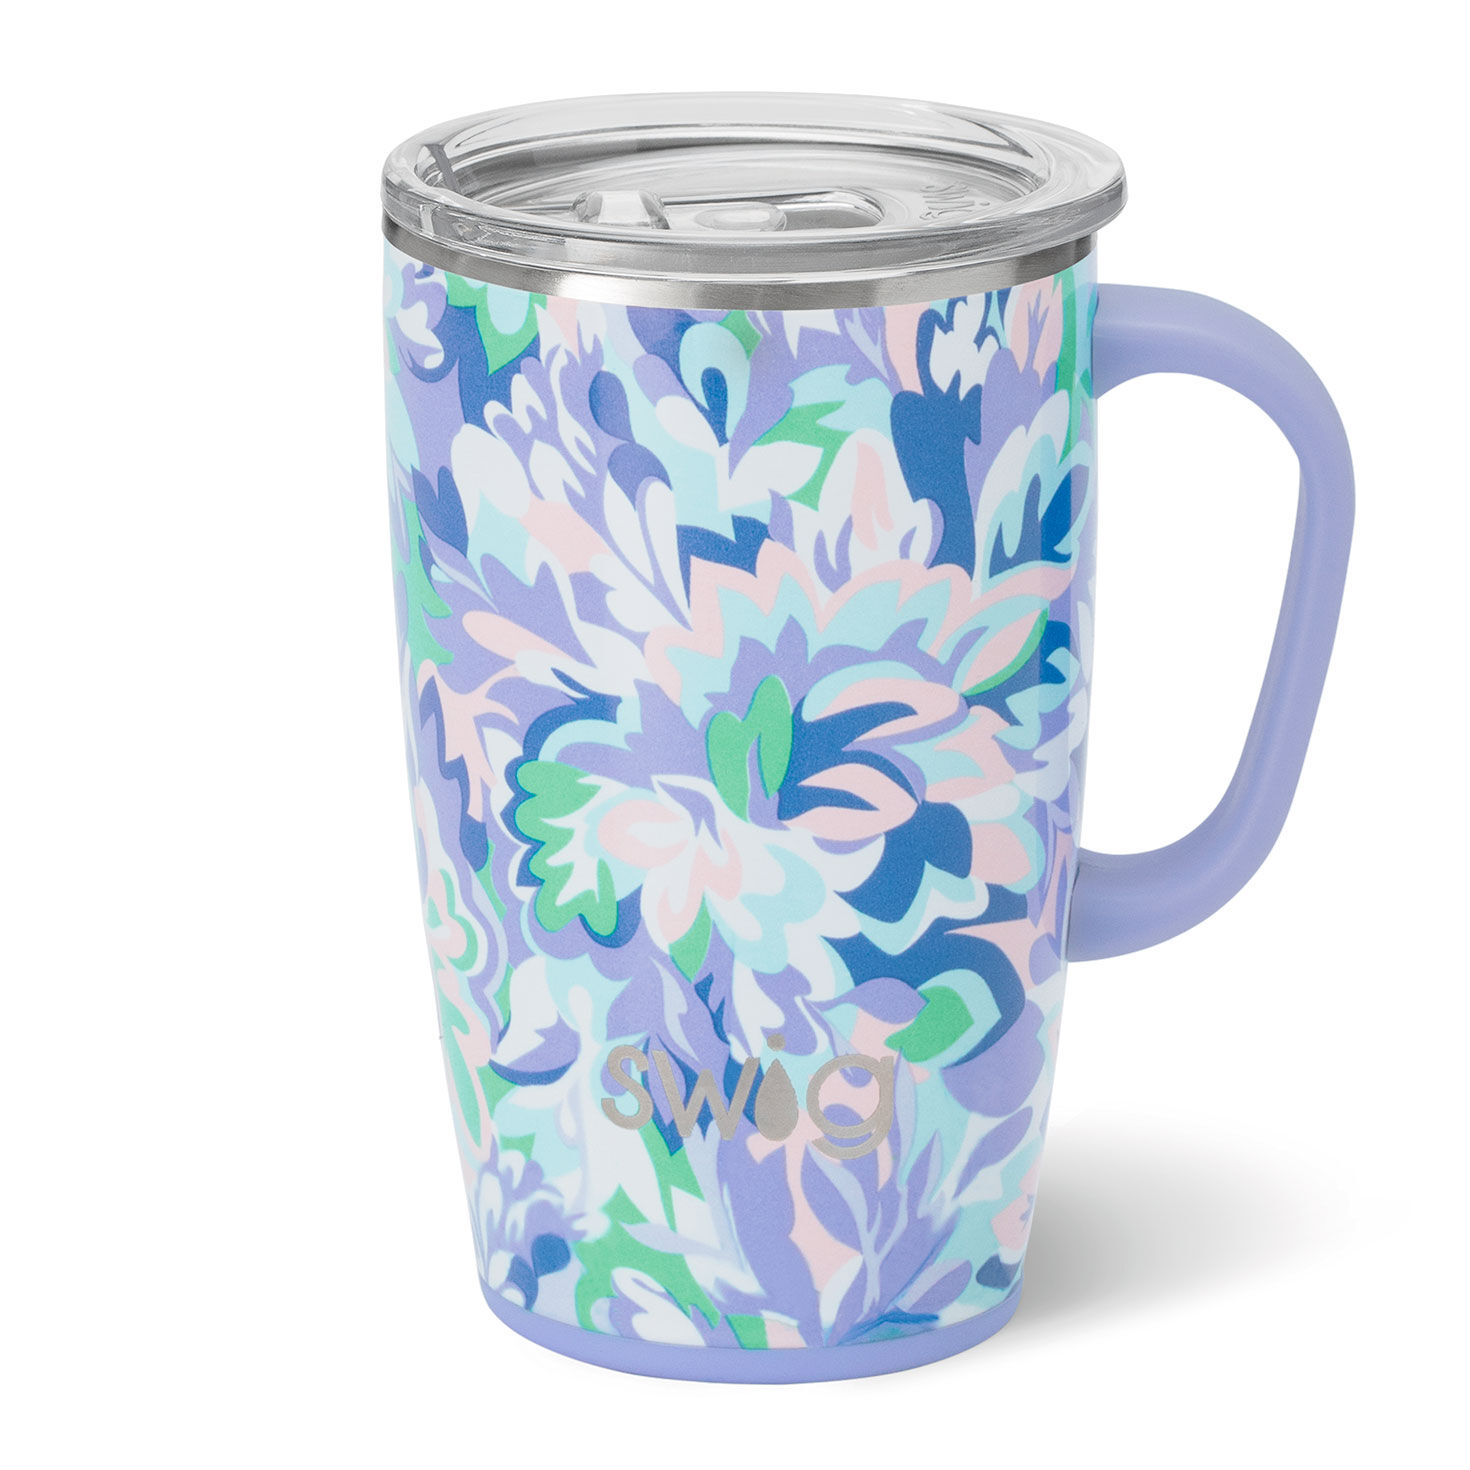 https://www.hallmark.com/dw/image/v2/AALB_PRD/on/demandware.static/-/Sites-hallmark-master/default/dw097f7f5d/images/finished-goods/products/S102C18MN/Purple-and-Blue-Floral-Insulated-Slim-Travel-Mug_S102C18MN_01.jpg?sfrm=jpg